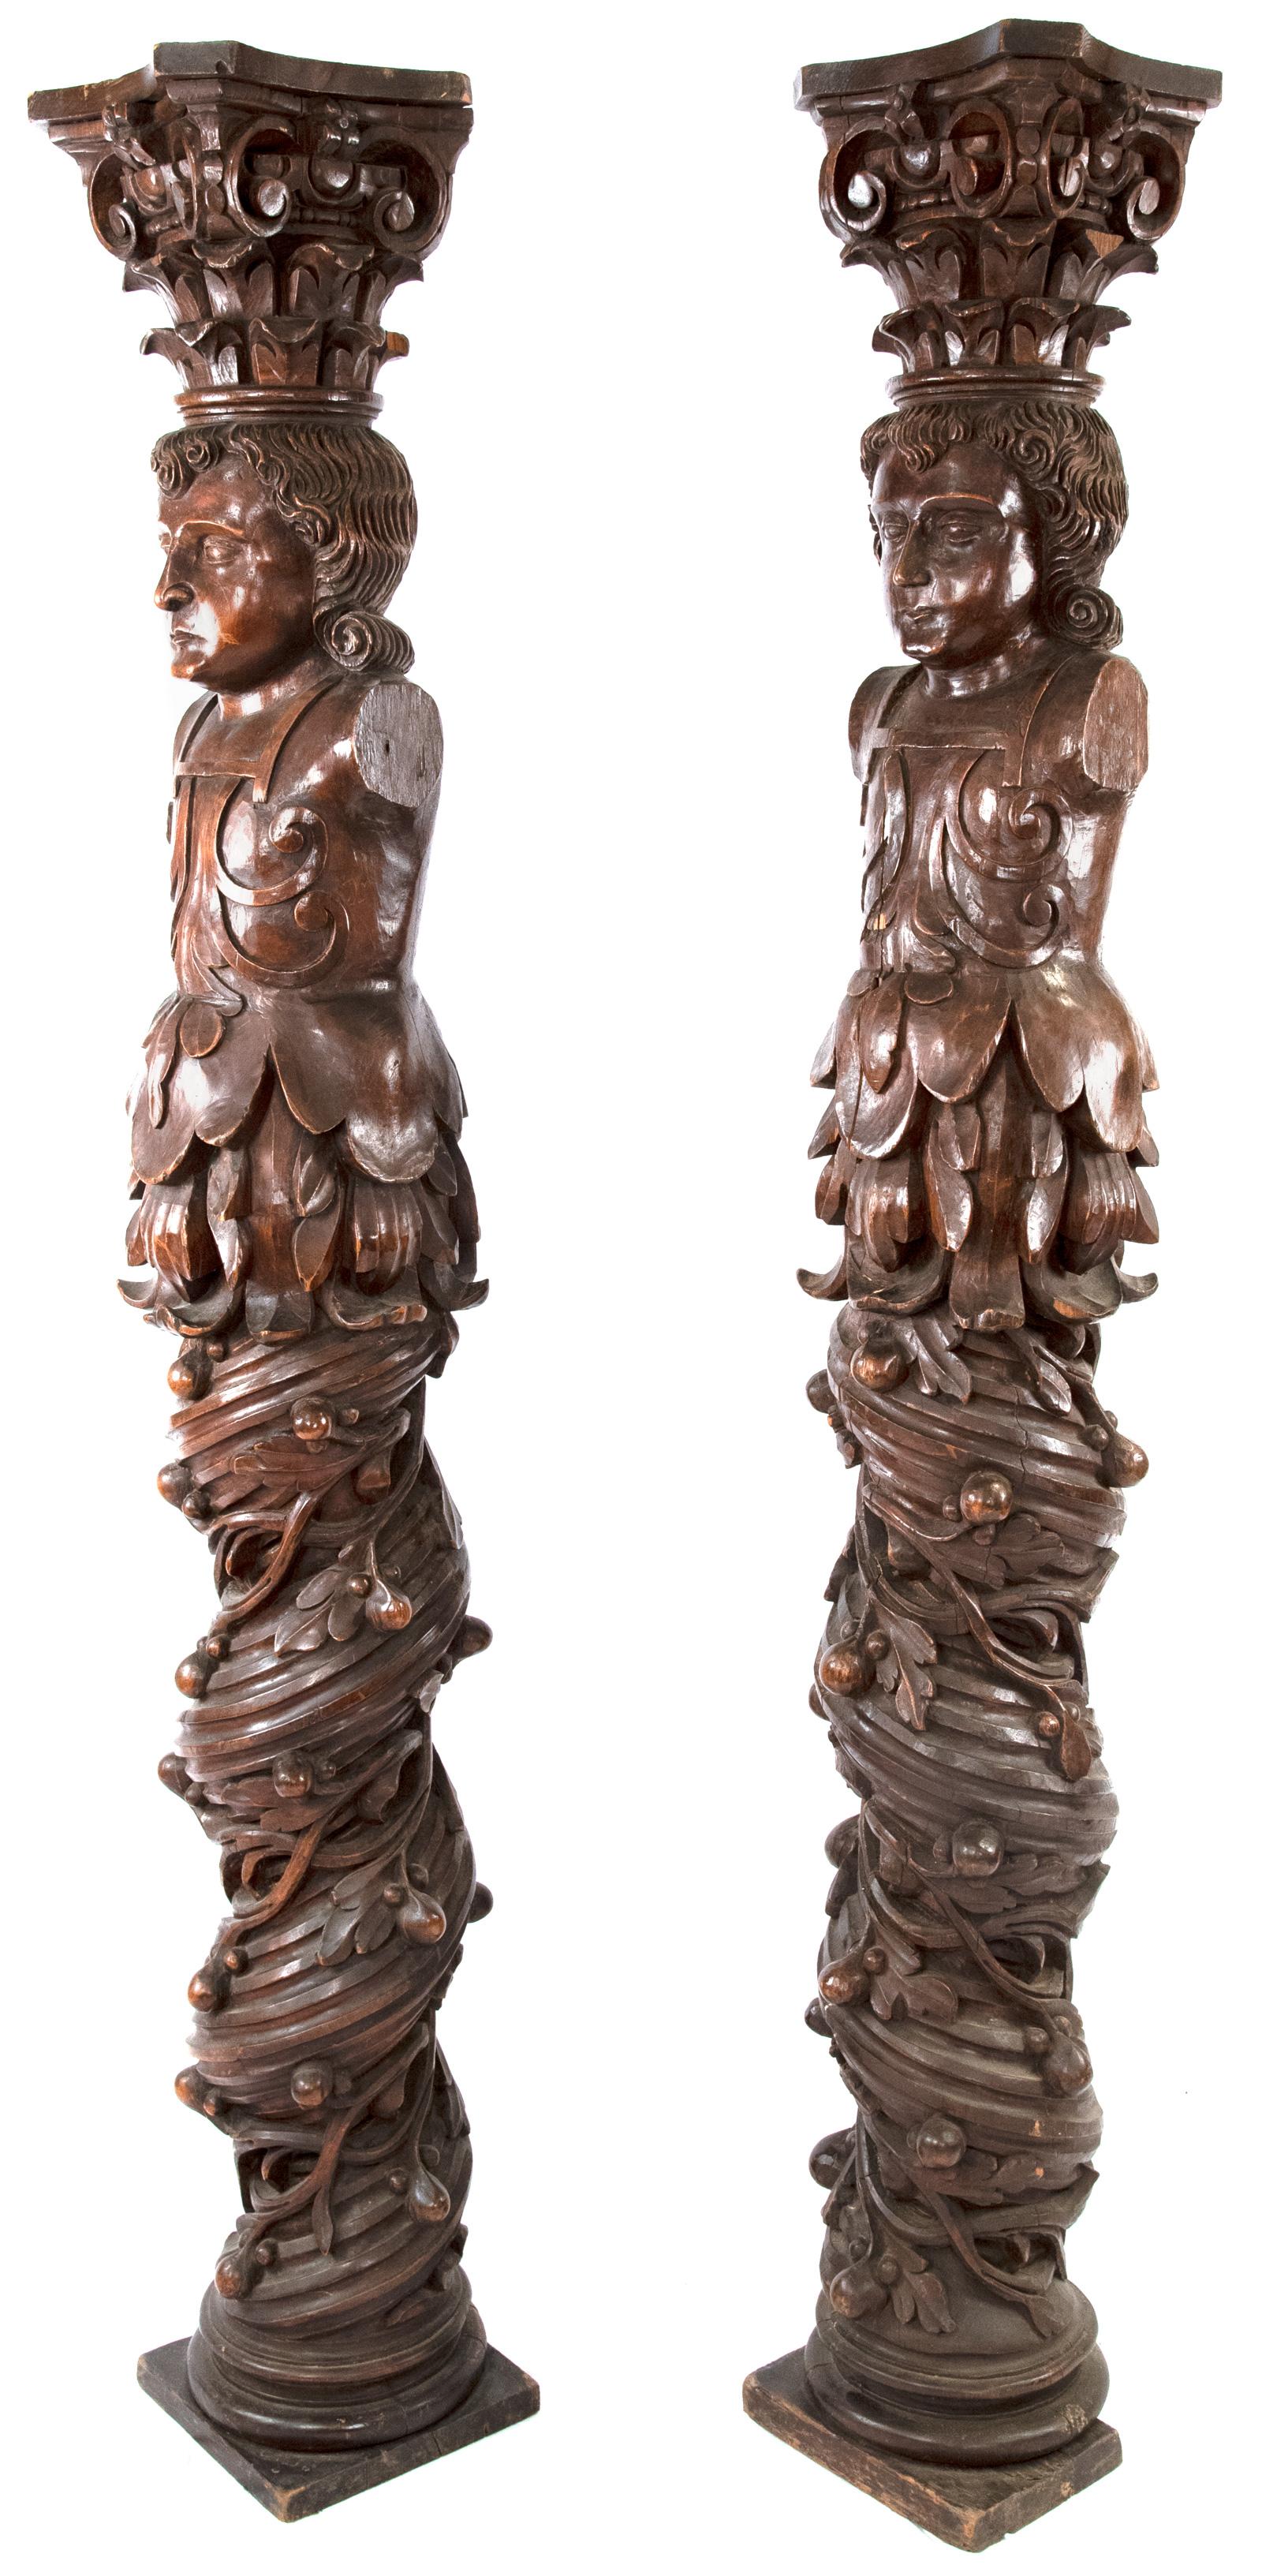 Two William & Mary carved English oak columns with Solomonic twisting and carved with full-relief fruit-and-leaf vines emanating from the base of court figures dressed in period costume. Each column is topped with elaborate Corinthian capitols. The